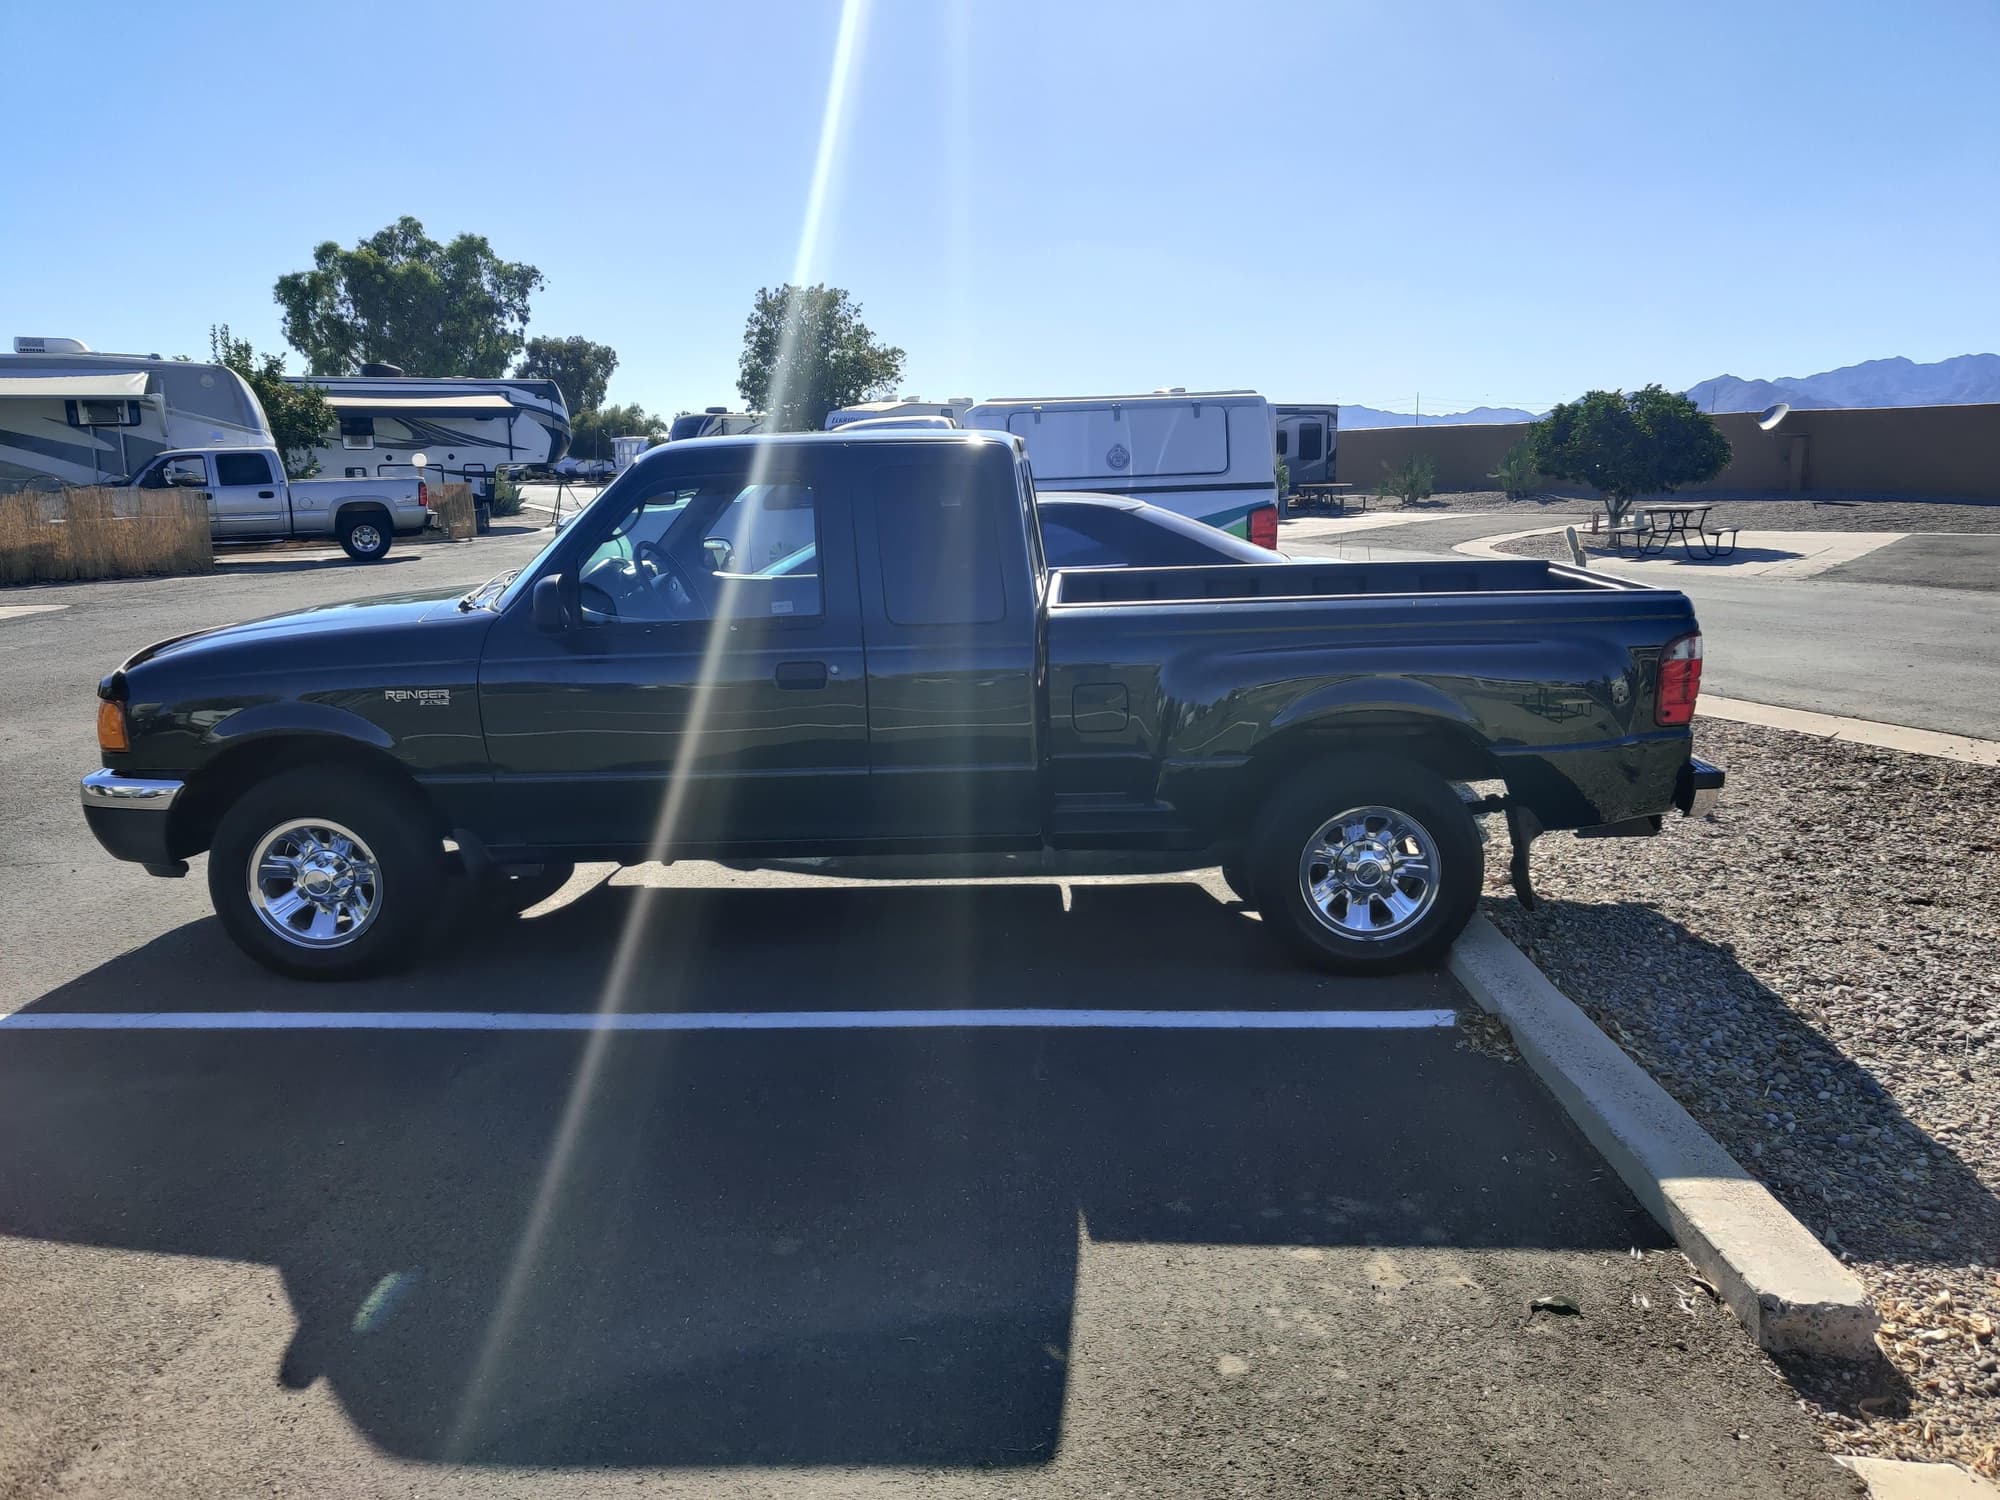 New to me, 2003 Ford Ranger Ford Truck Enthusiasts Forums